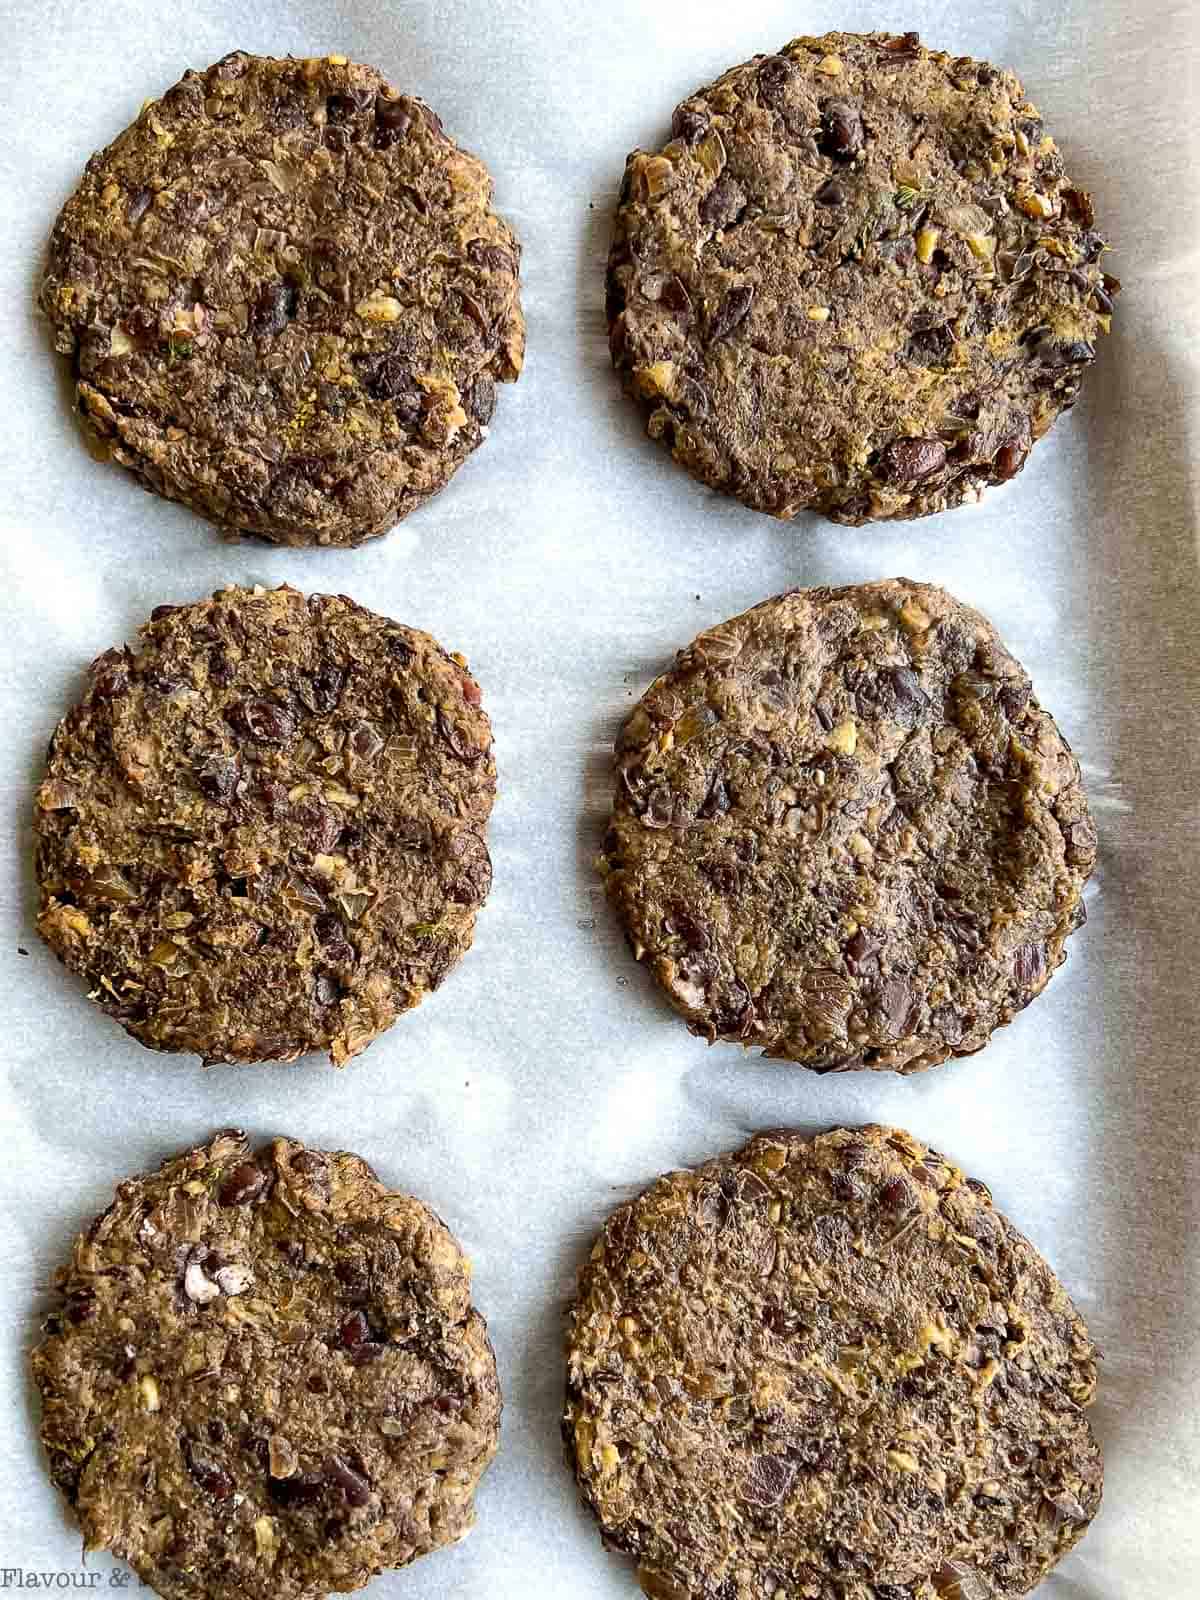 6 mushroom burgers on a baking sheet, ready to cook or freeze.